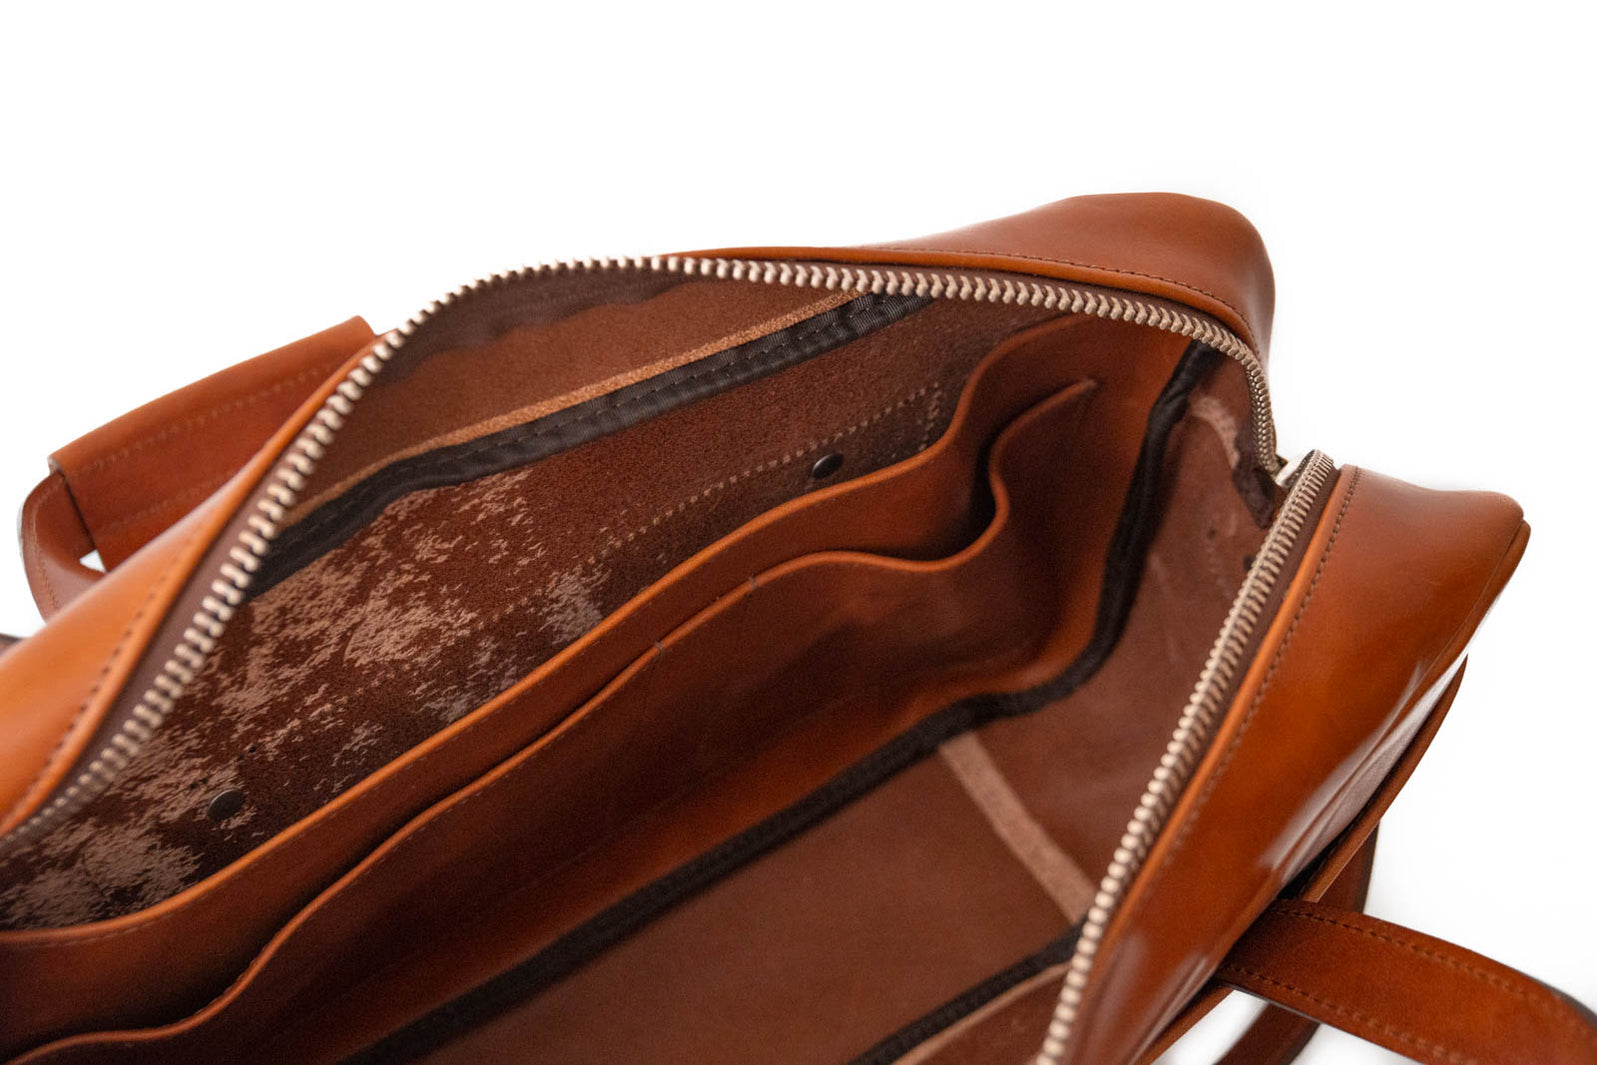 Men's Brown Western Leather Briefcase | Stock and Barrel